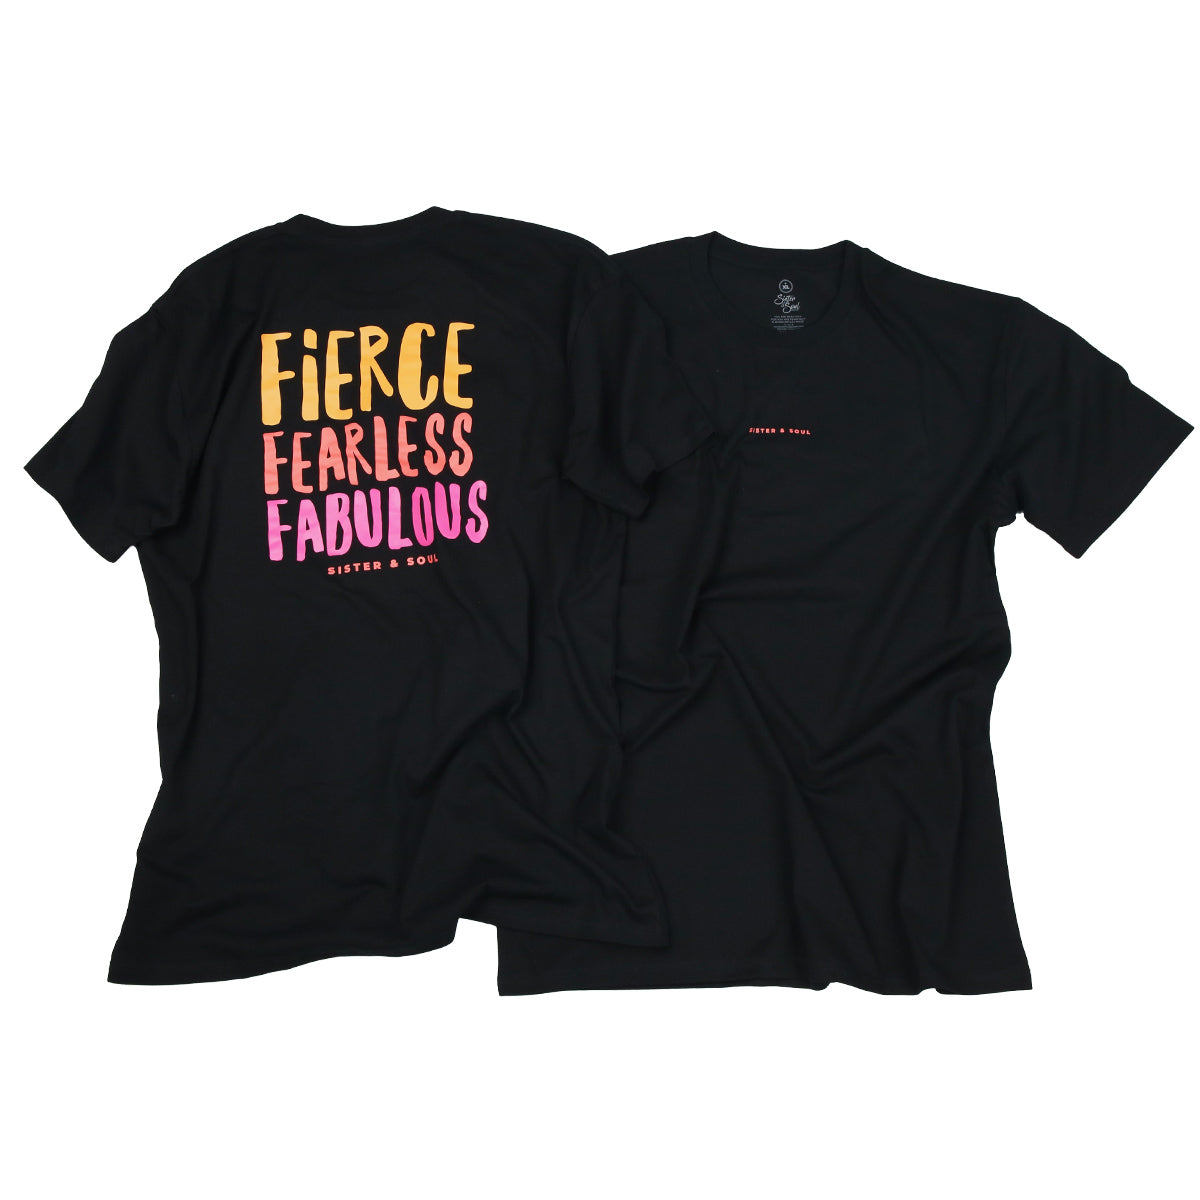 FIERCE FEARLESS FABULOUS  - Plus Size Long Boxy Tee - Black with Colourful Print